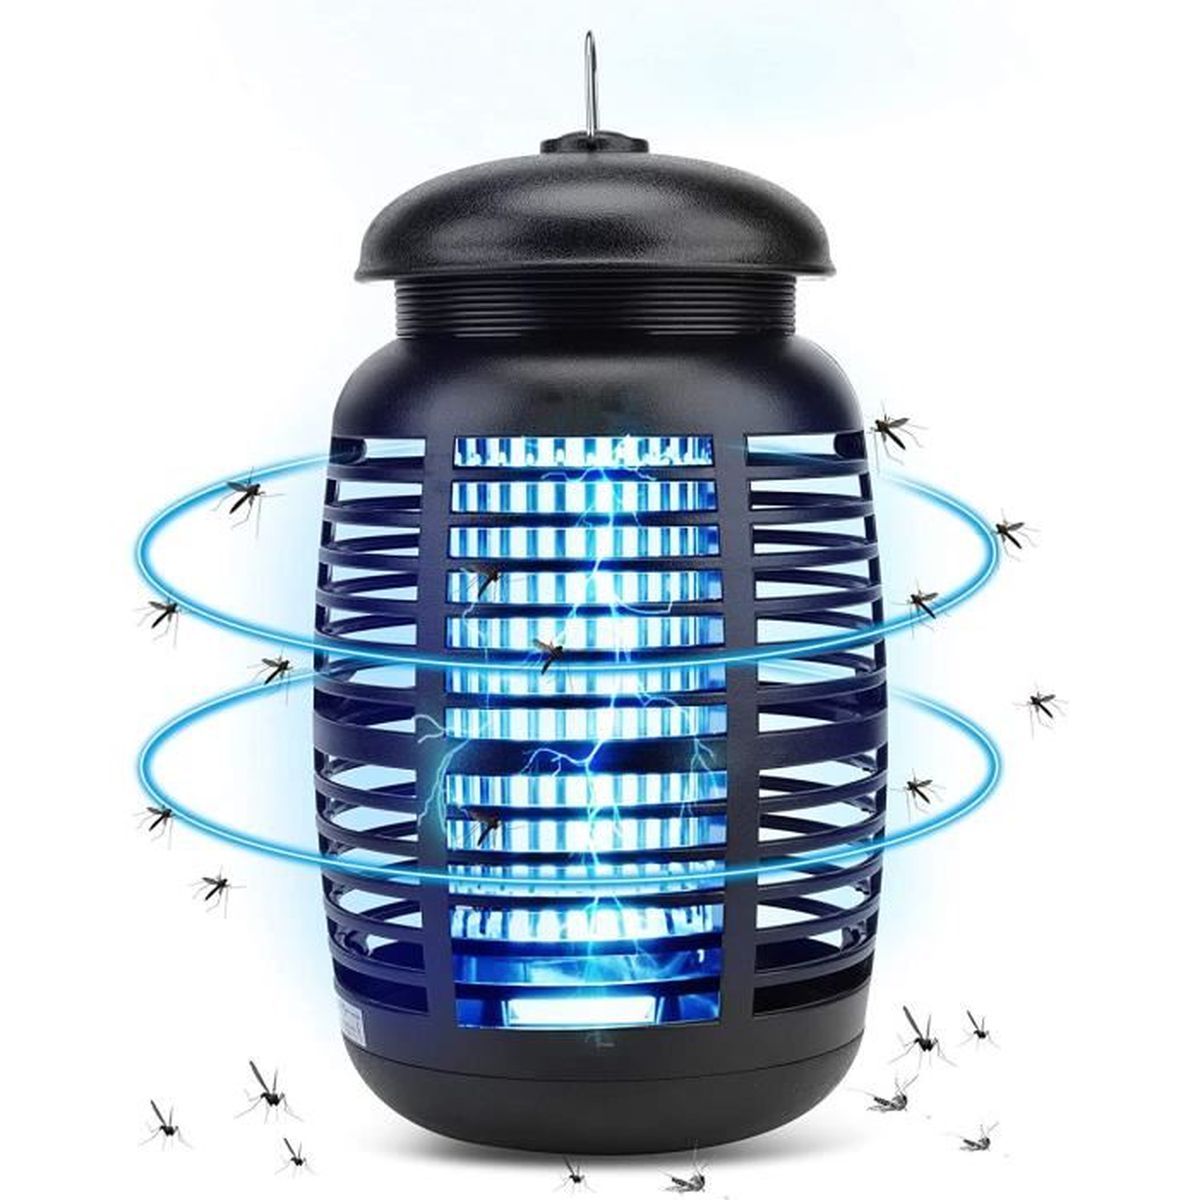 Efficaces uv insectes piège Insectes tueur Insectes Lampe insecticide 